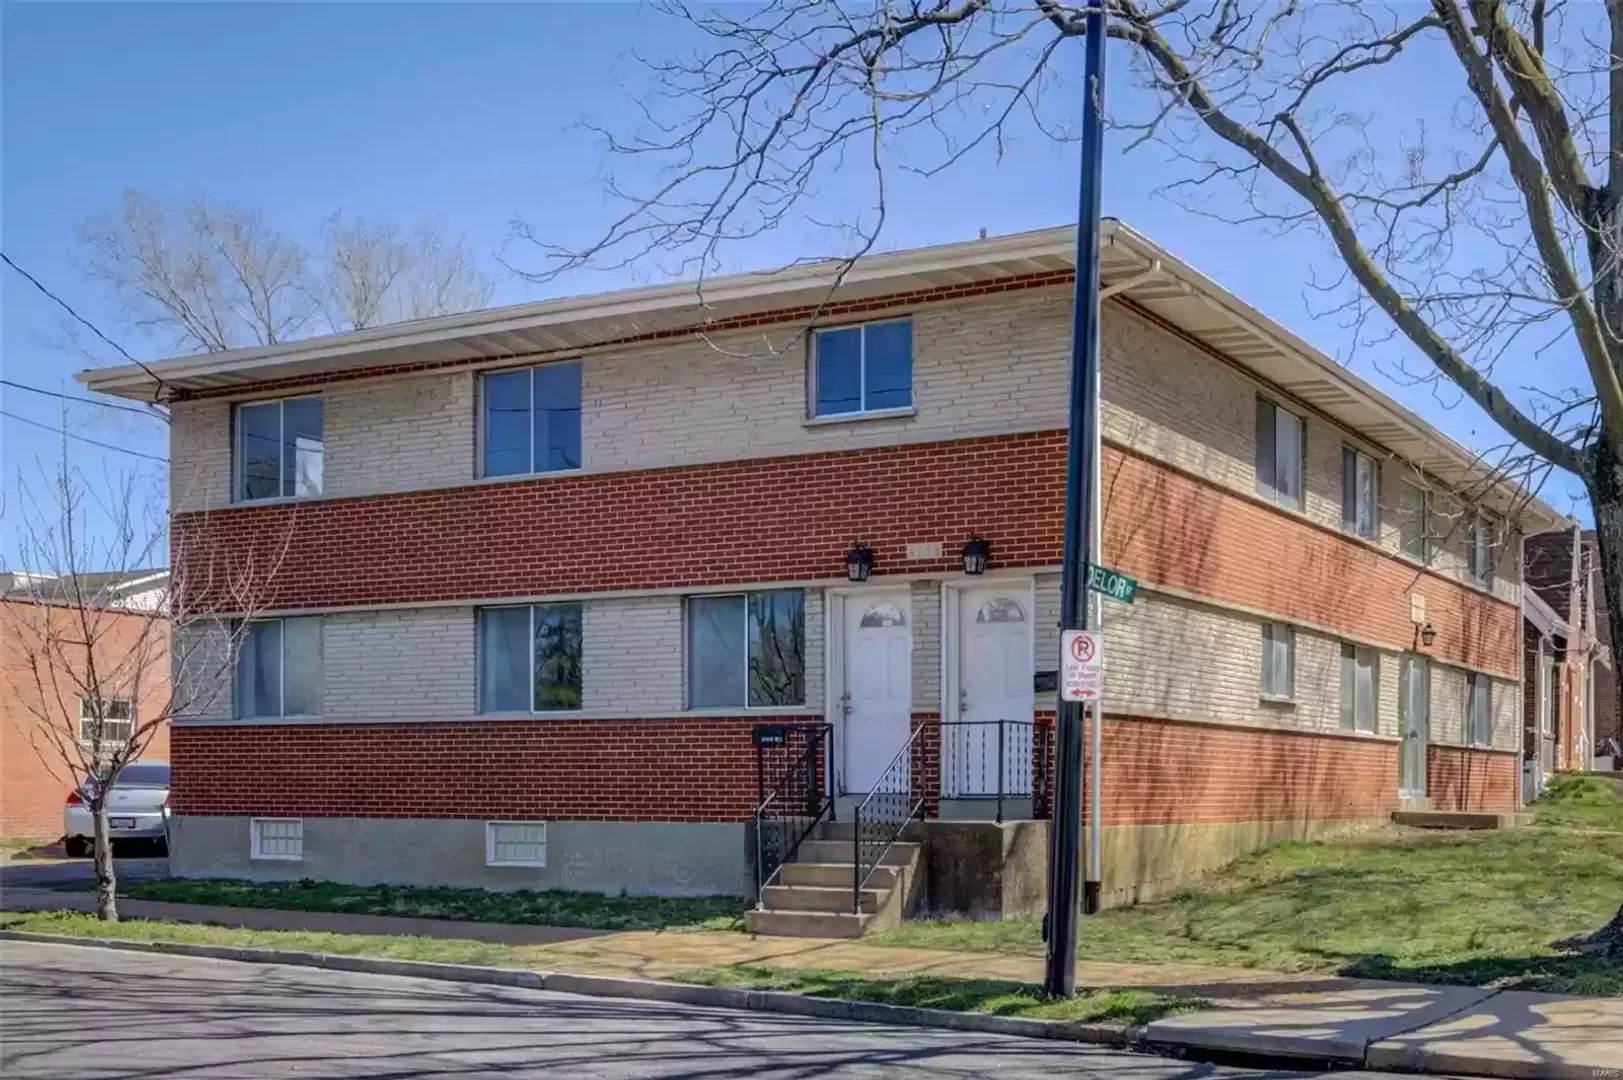 Apartments Near ITT Technical Institute-Arnold 4754 Virginia Ave for ITT Technical Institute-Arnold Students in Arnold, MO